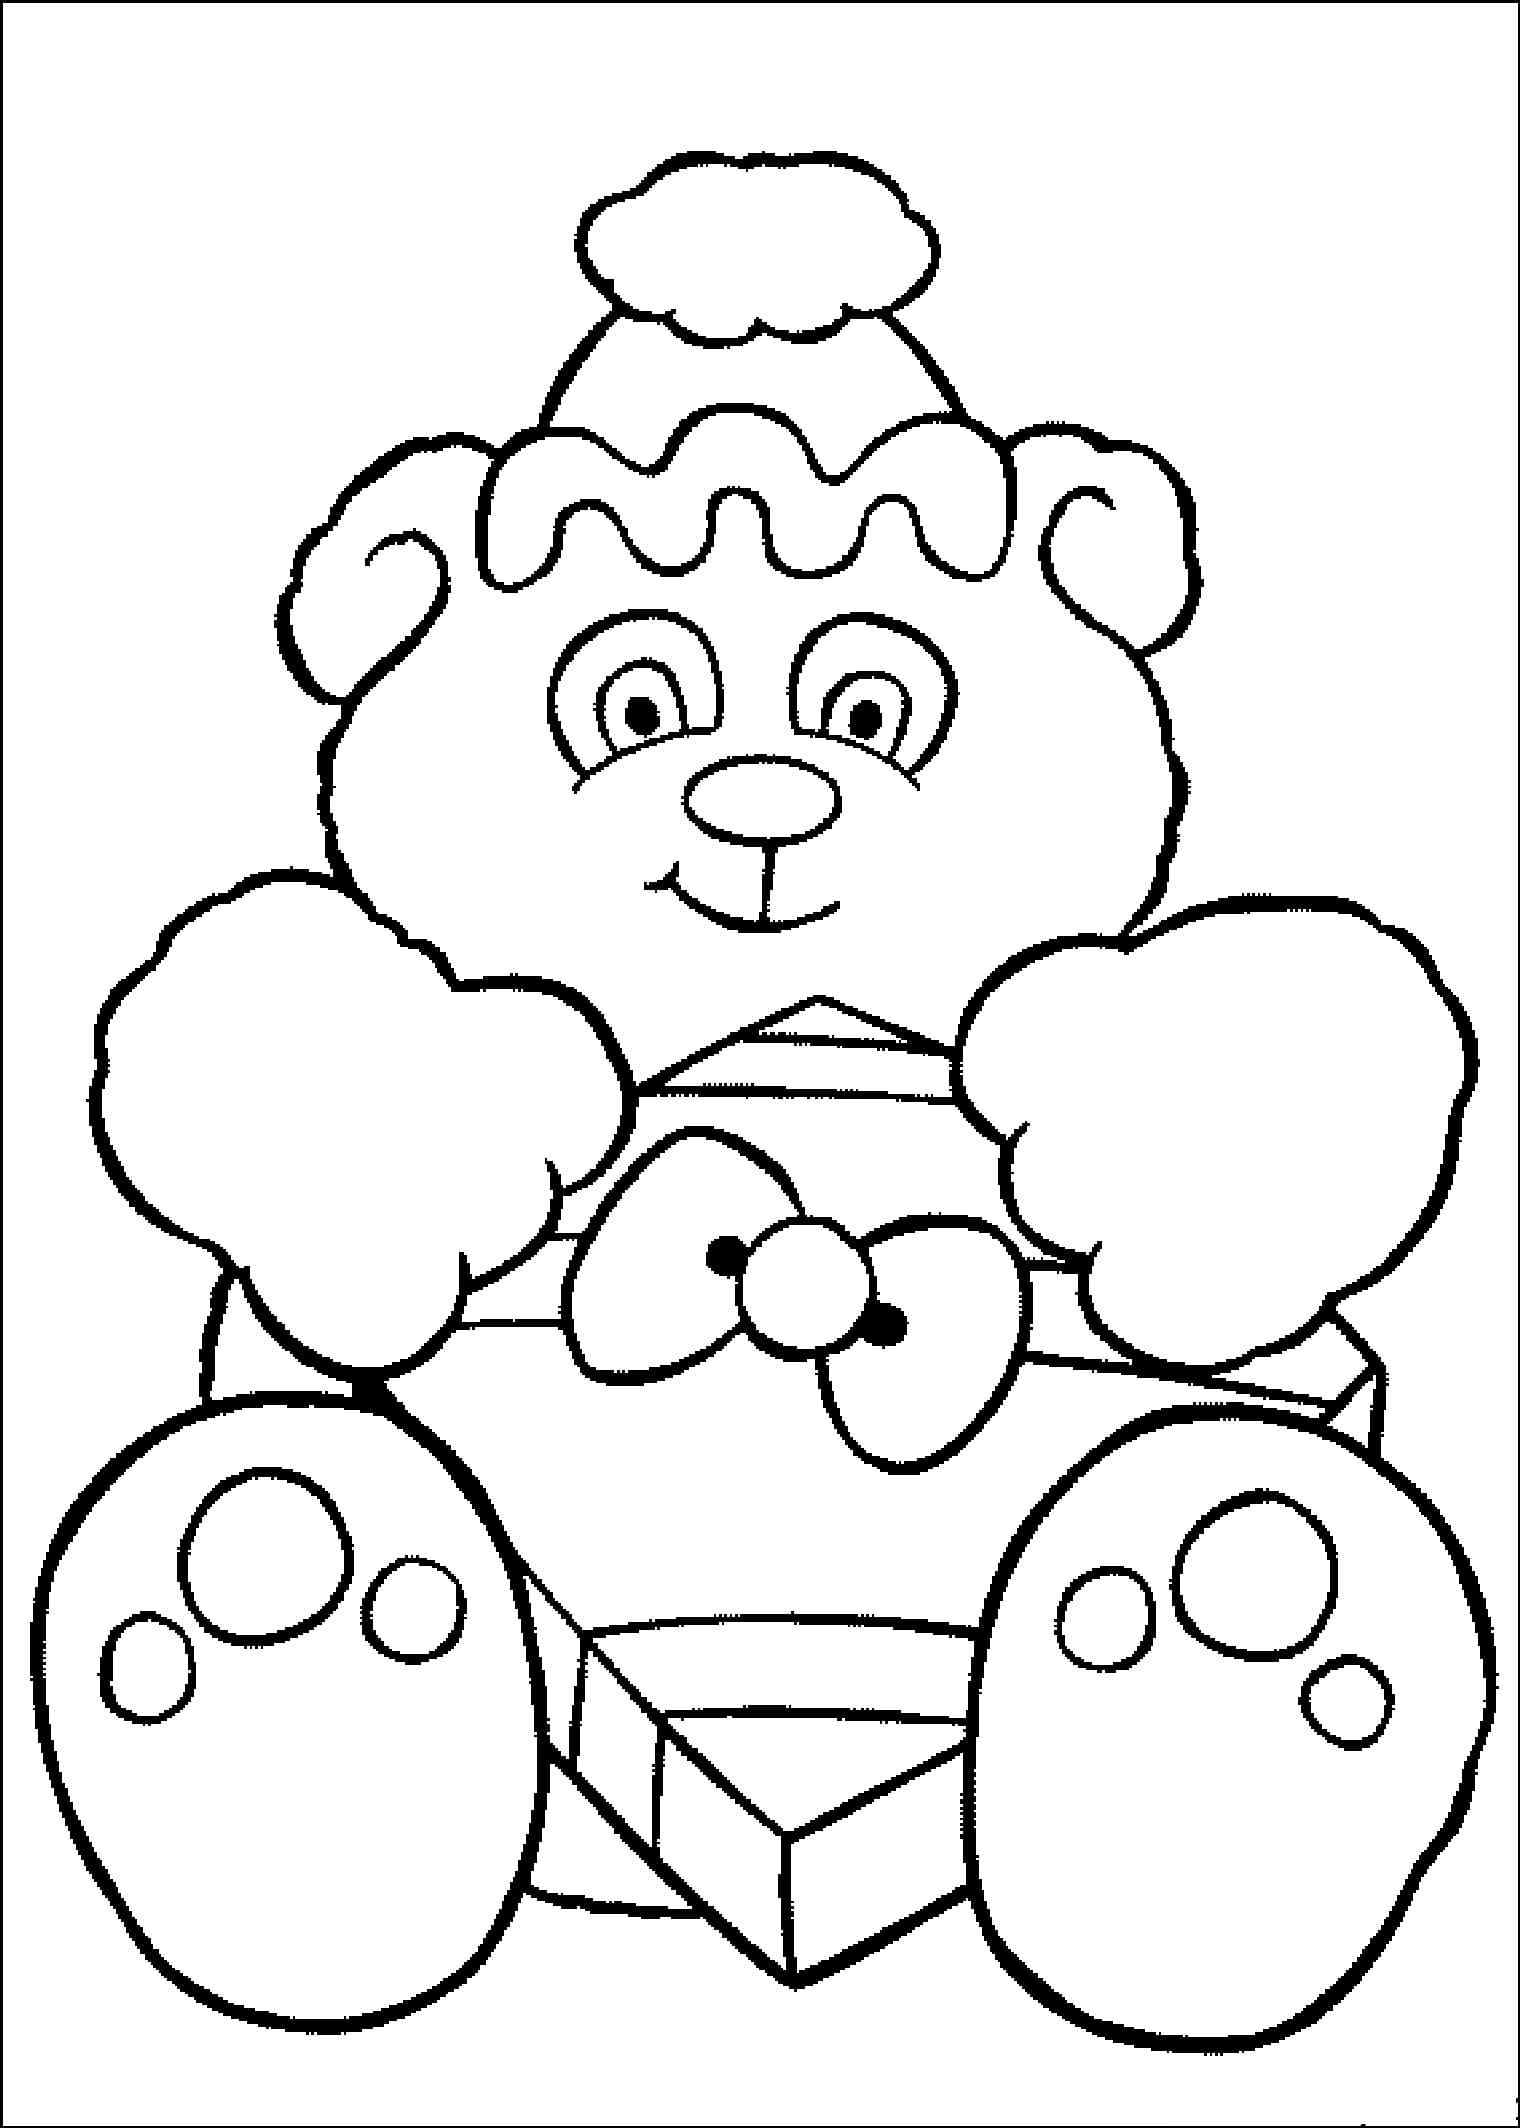 This Is My Gift Coloring Page